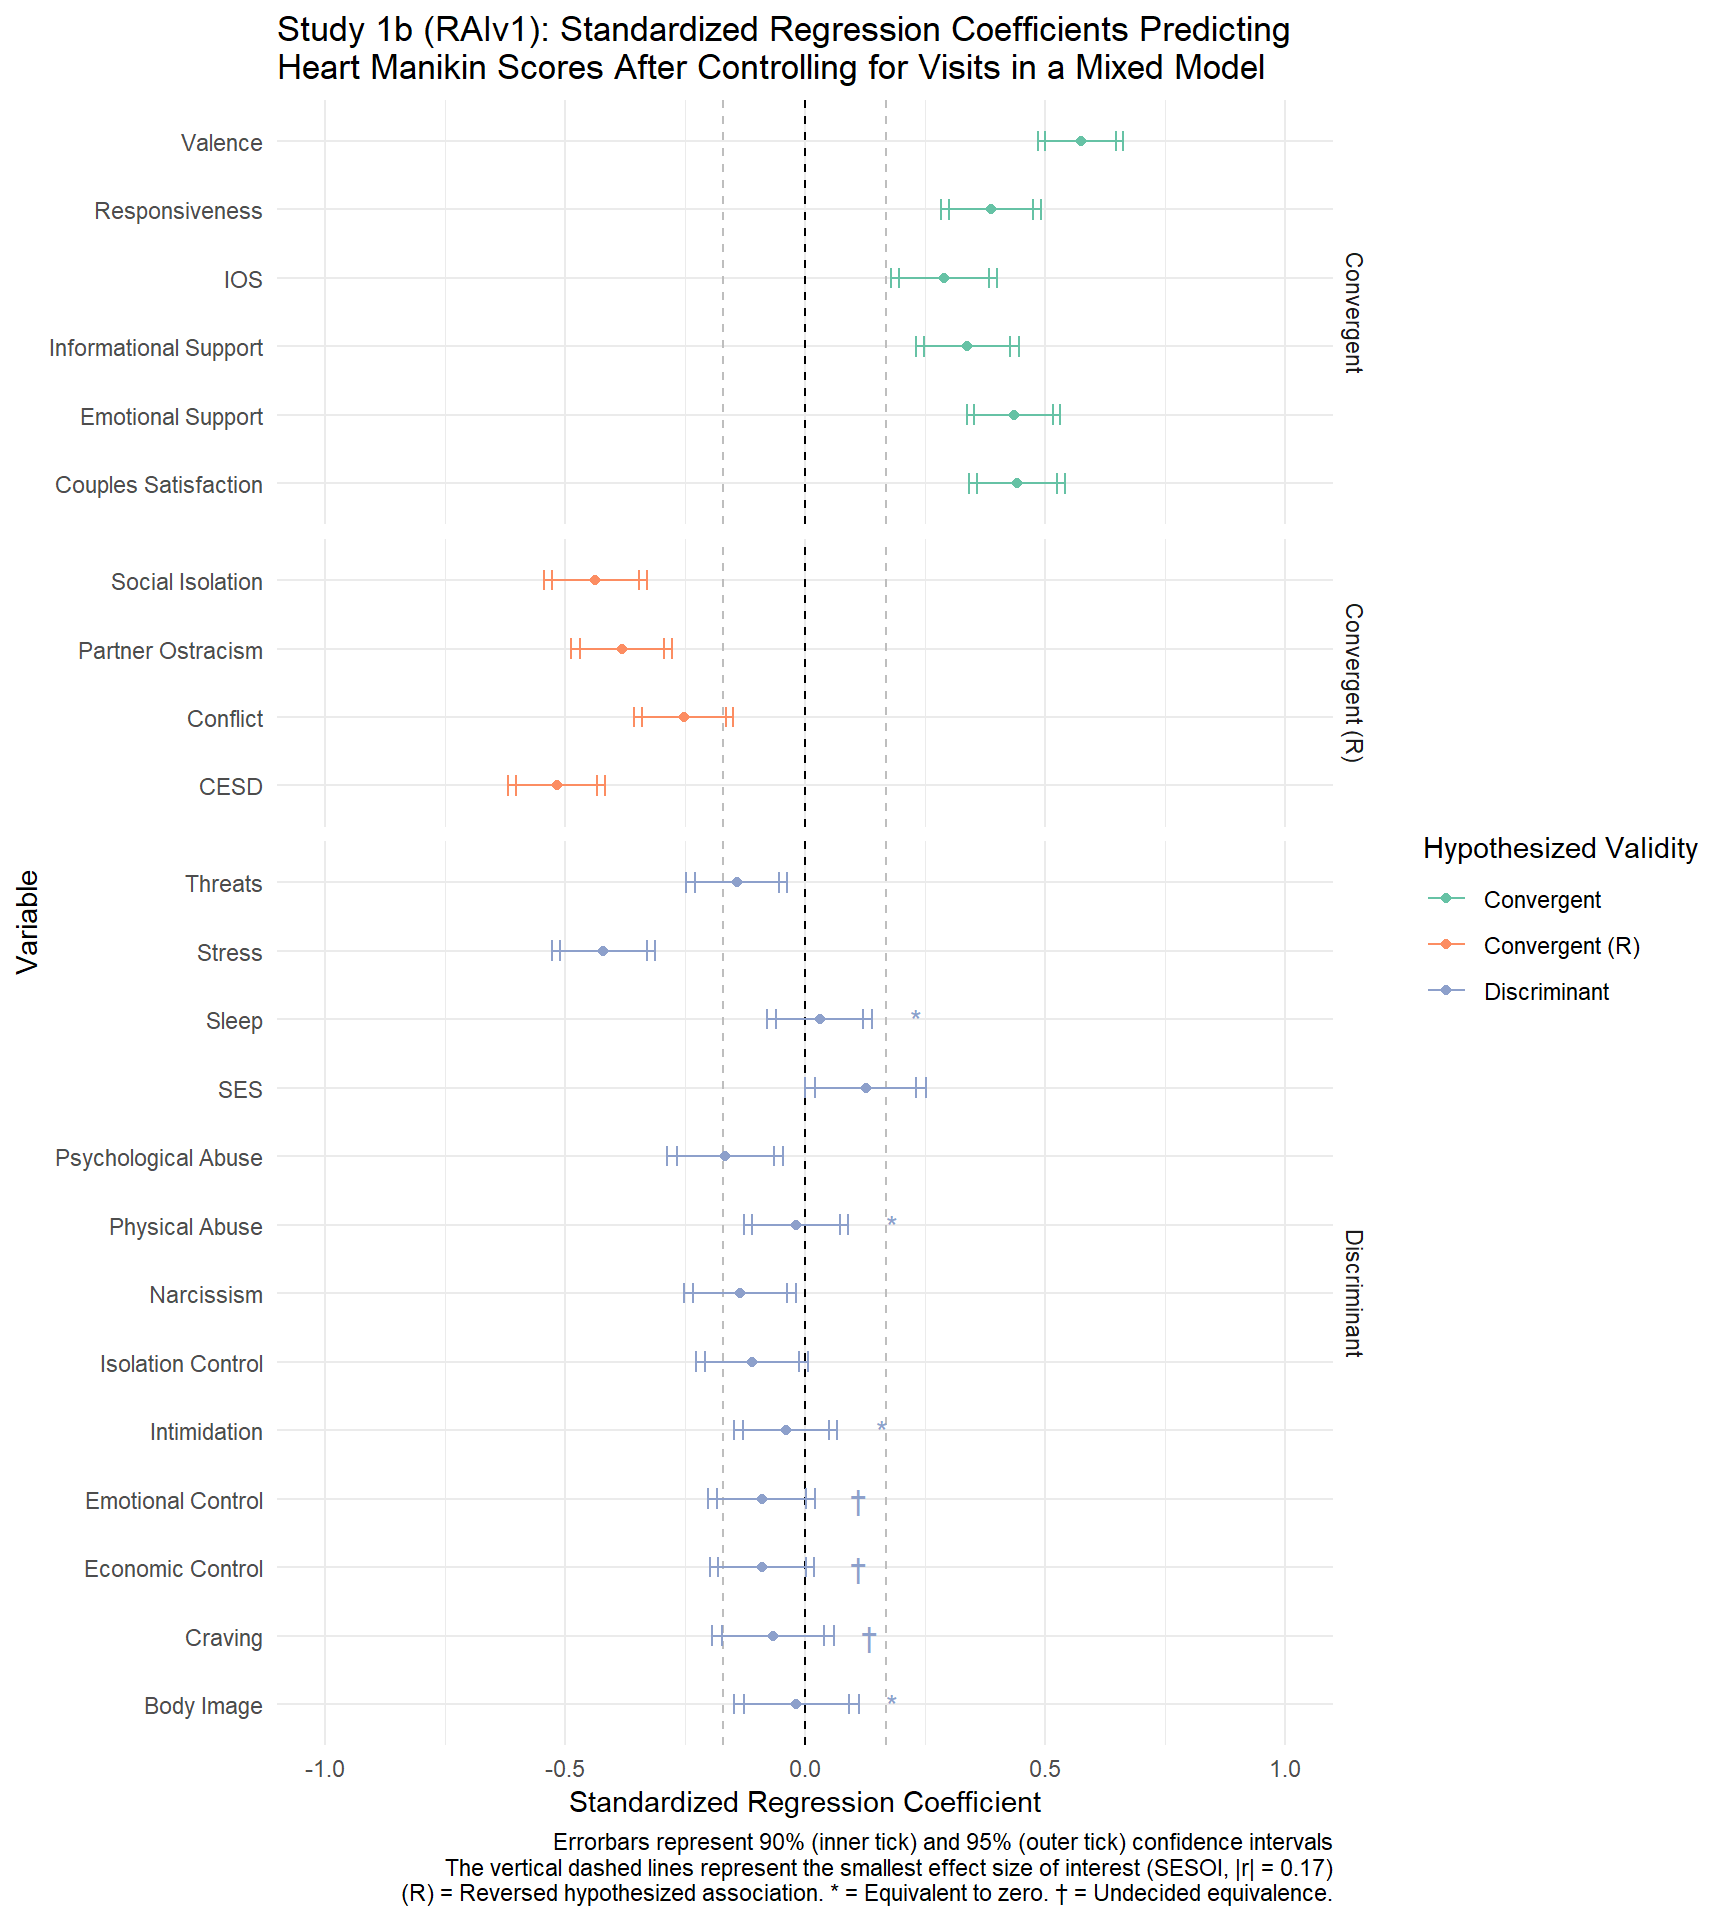 Study 1b - Forestplot Showing Correlation Coefficients with Heart Manikin Scores